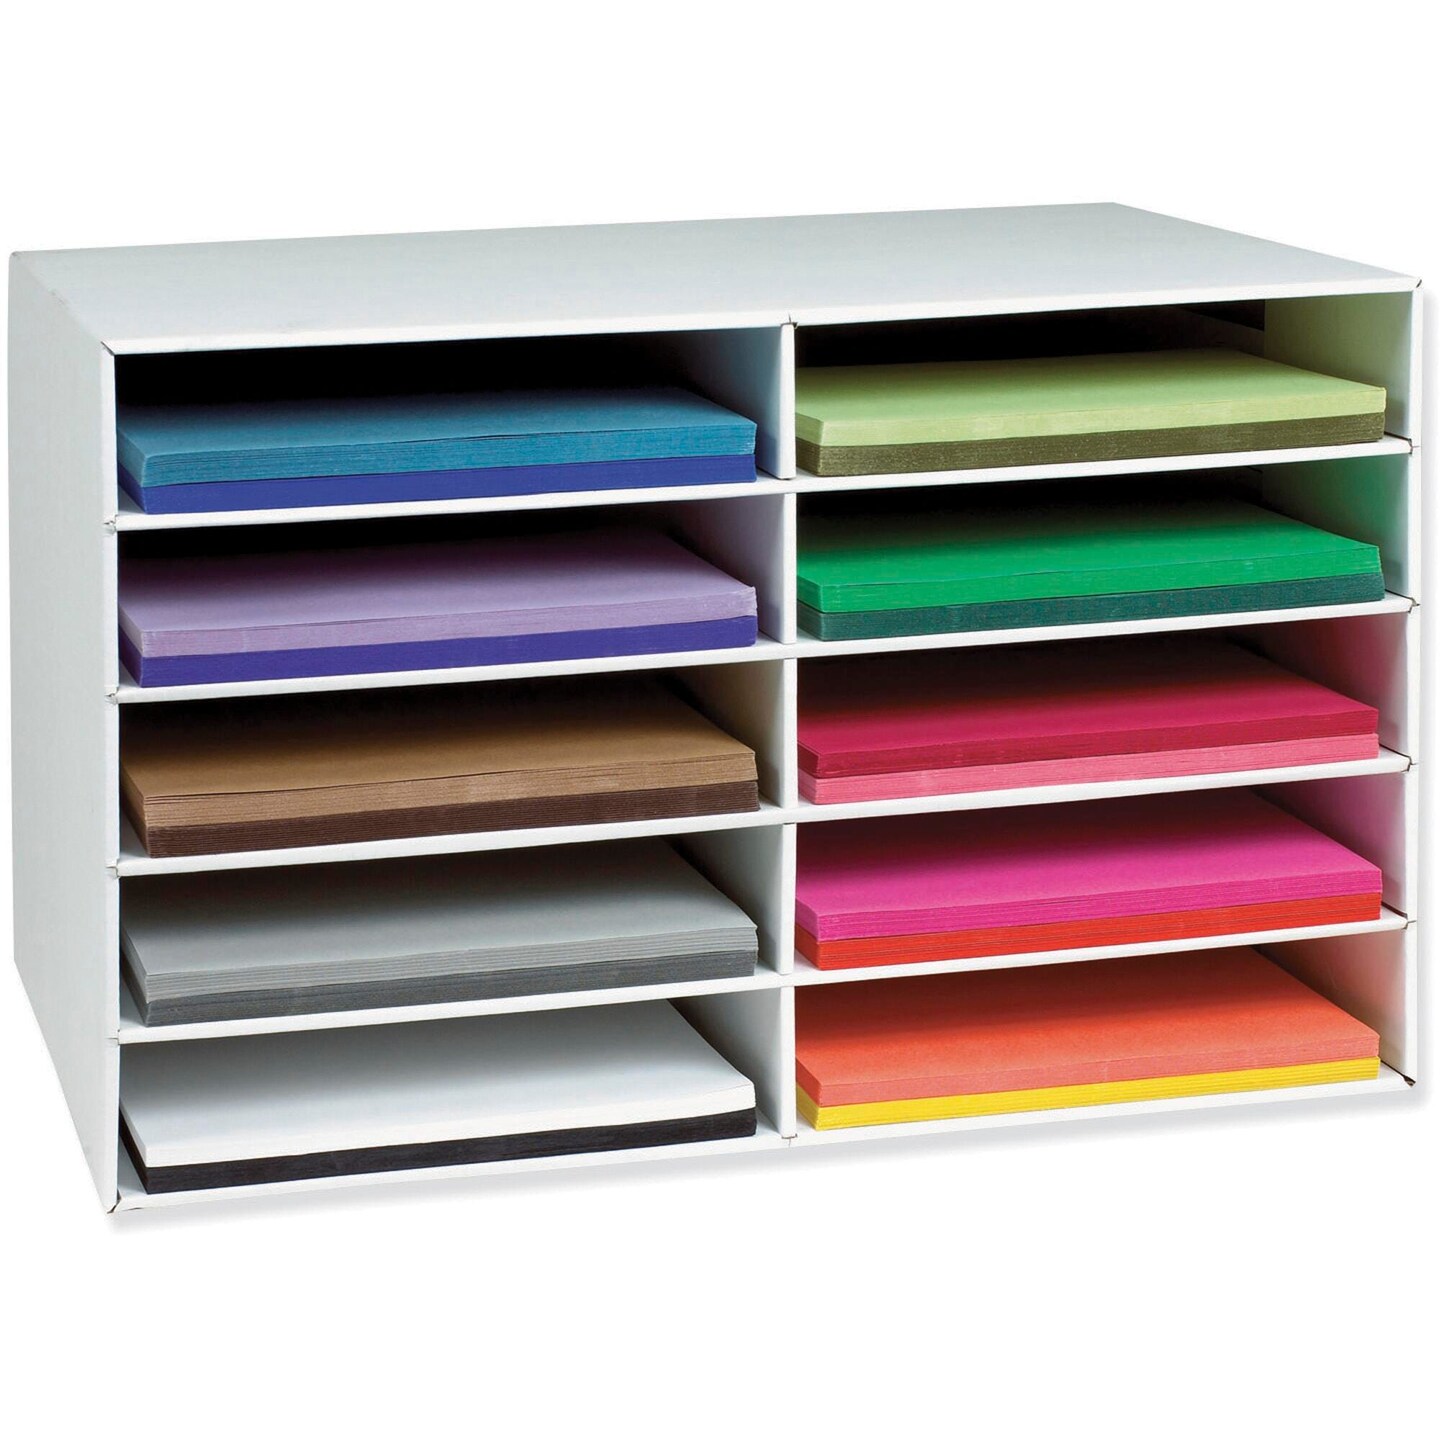 Classroom Keepers Construction Paper Storage for 12 x 18 Inch Construction Paper, 10 Slots